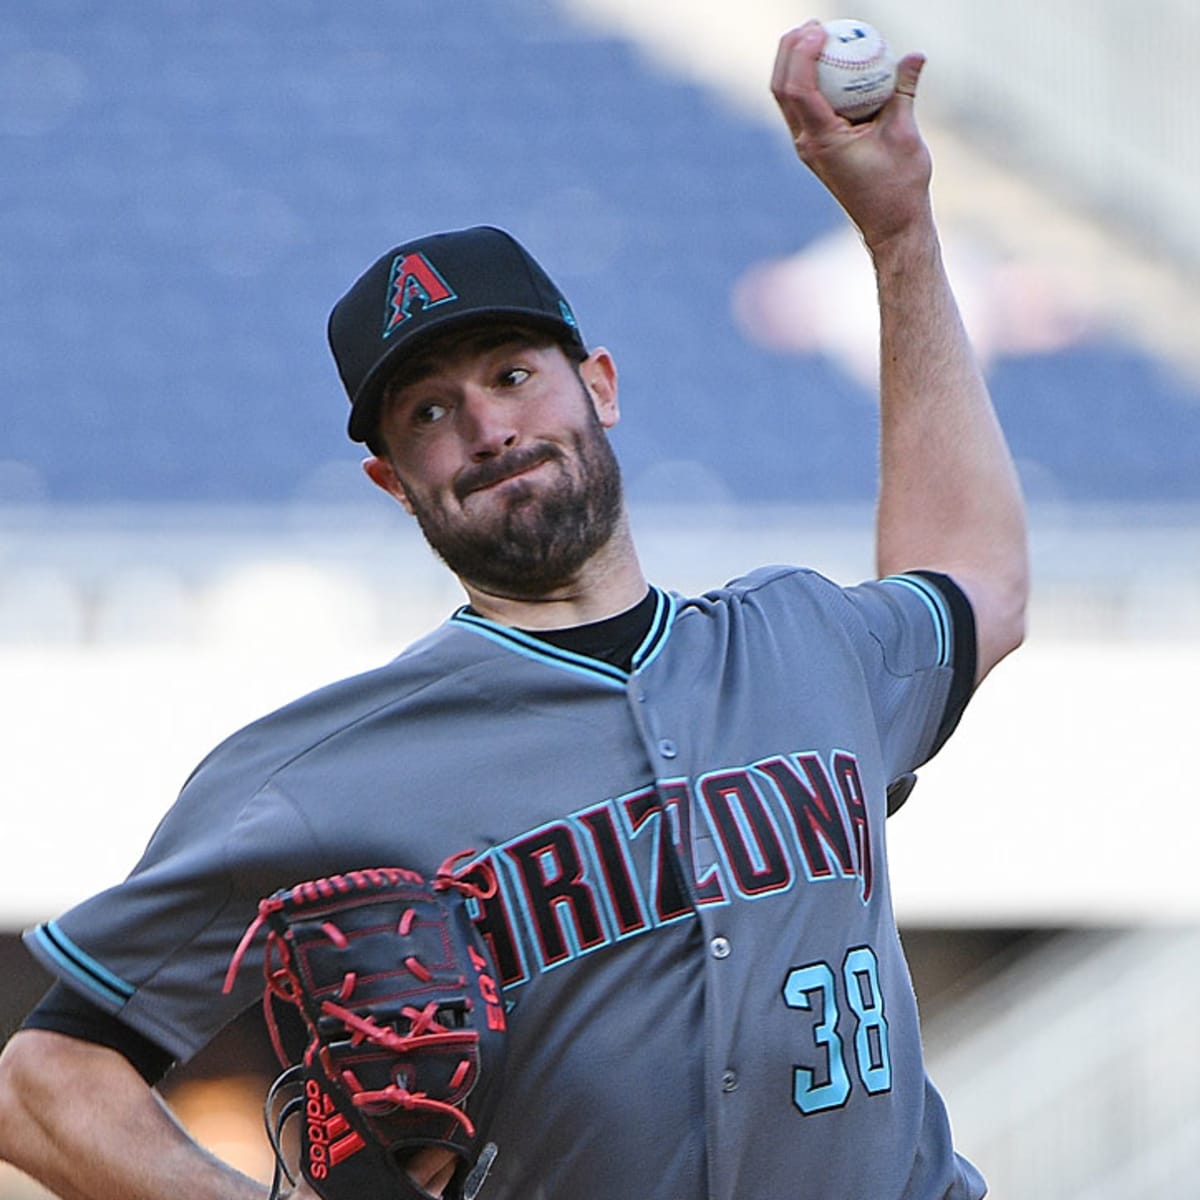 Diamondbacks' Robbie Ray feels as good as ever in latest strong outing